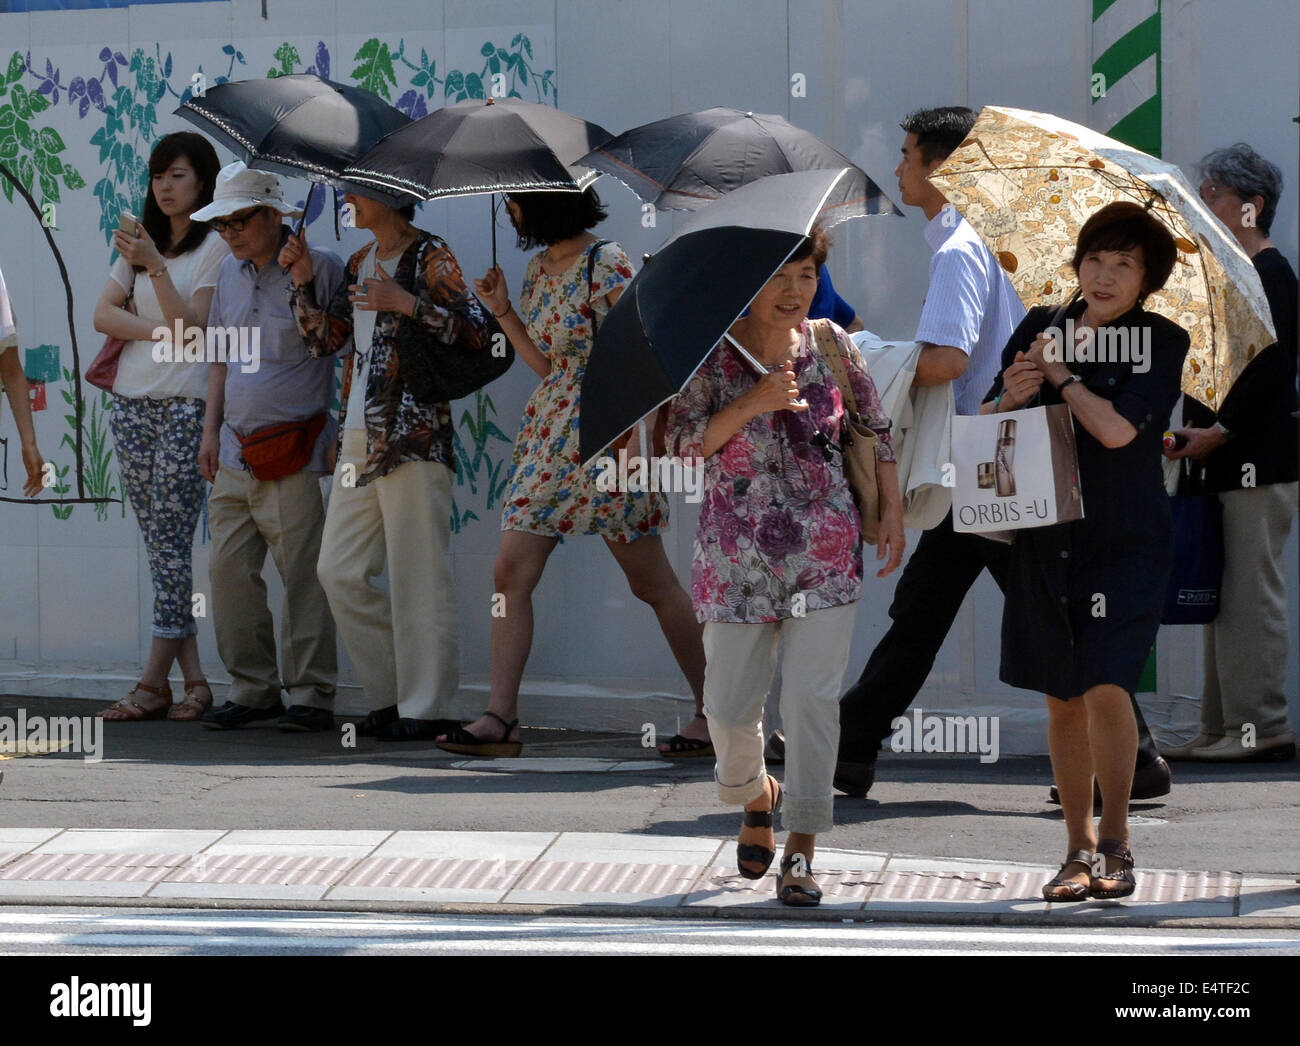 Tokyo, Japan. 16th July, 2014. A parasol is a must item for a woman as an  early summer heat bakes Tokyo with the temperature soaring as high as  nearly 90 degrees Fahrenheit. ©